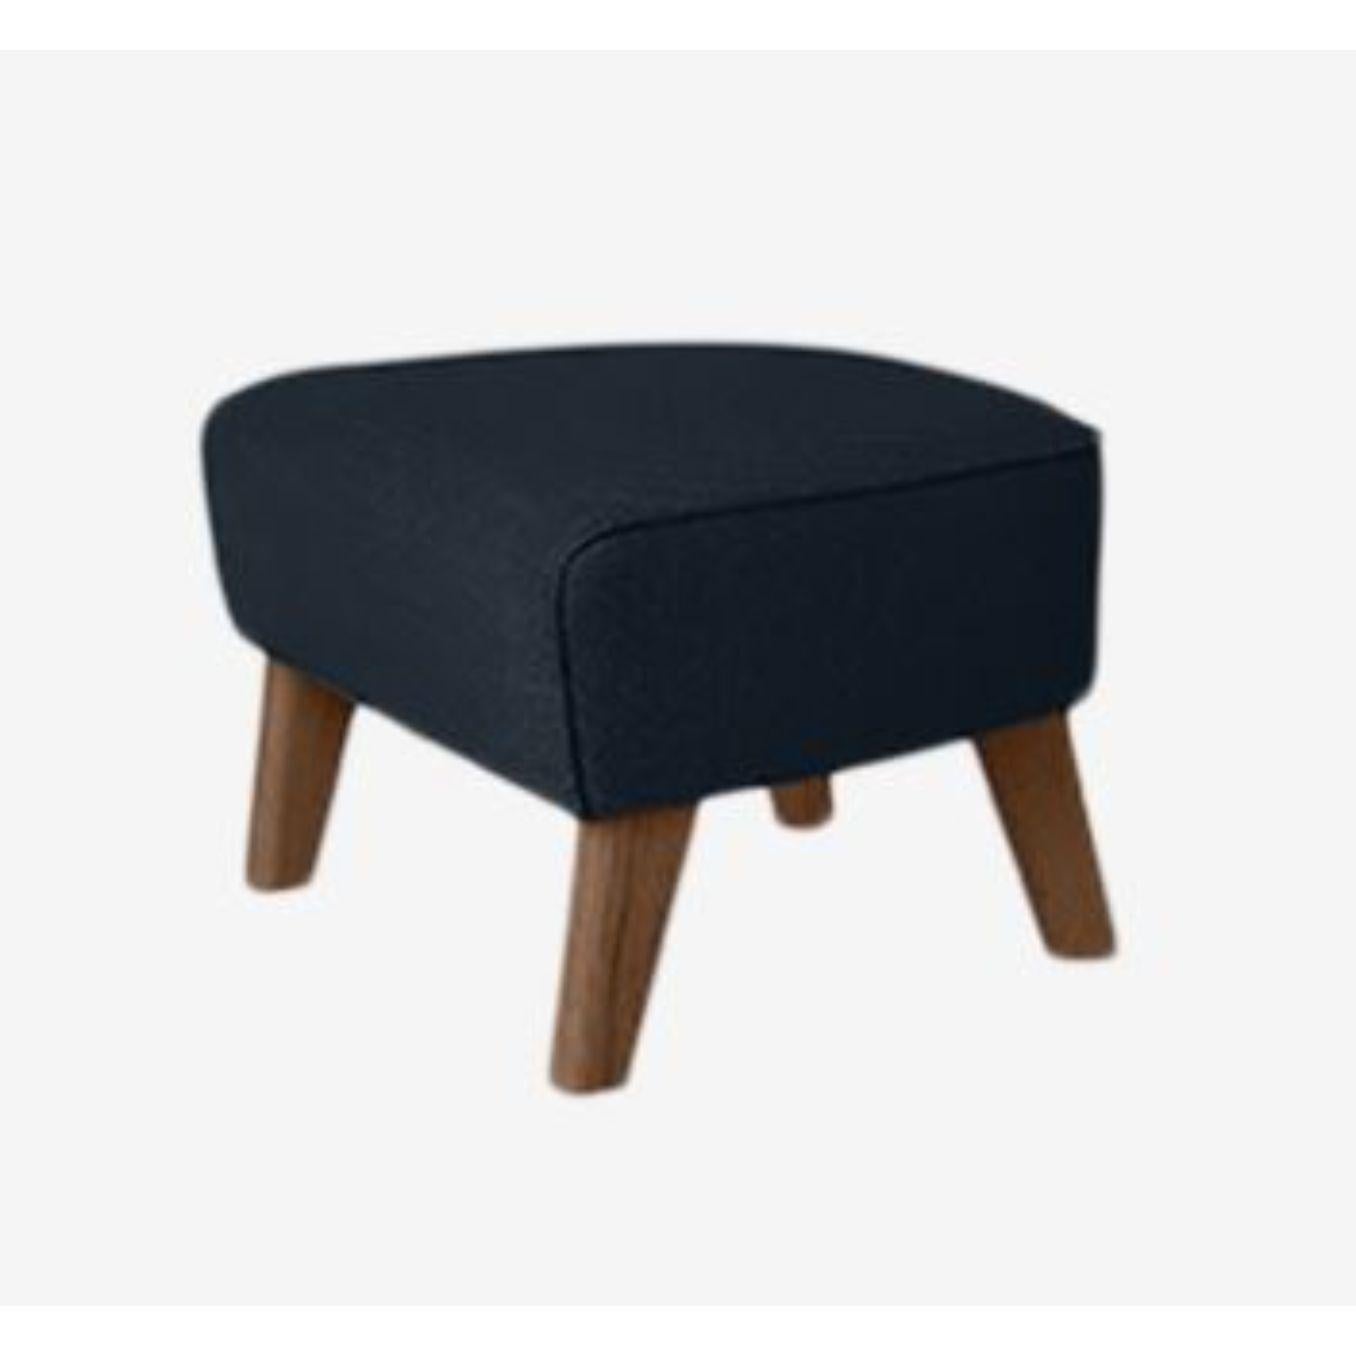 182 Raf Simons Vidar 3 My Own chair by Lassen.
Dimensions: D 58 x W 56 x H 40 cm 
Materials: Textile, Smoked Oak, 
Also available in different colors and materials.
Weight: 18 Kg

The My Own Chair Footstool has been designed in the same spirit